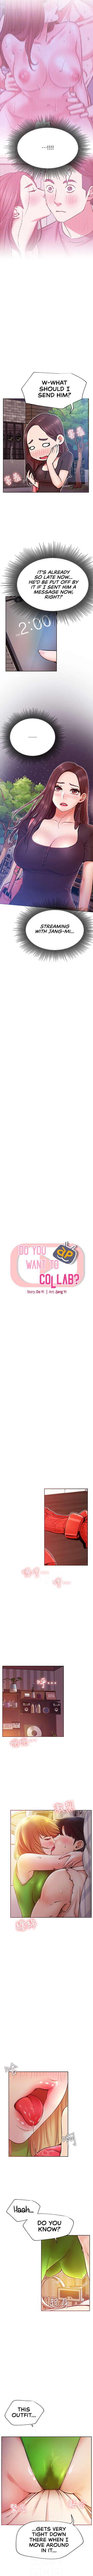 do-you-want-to-collab-chap-32-1